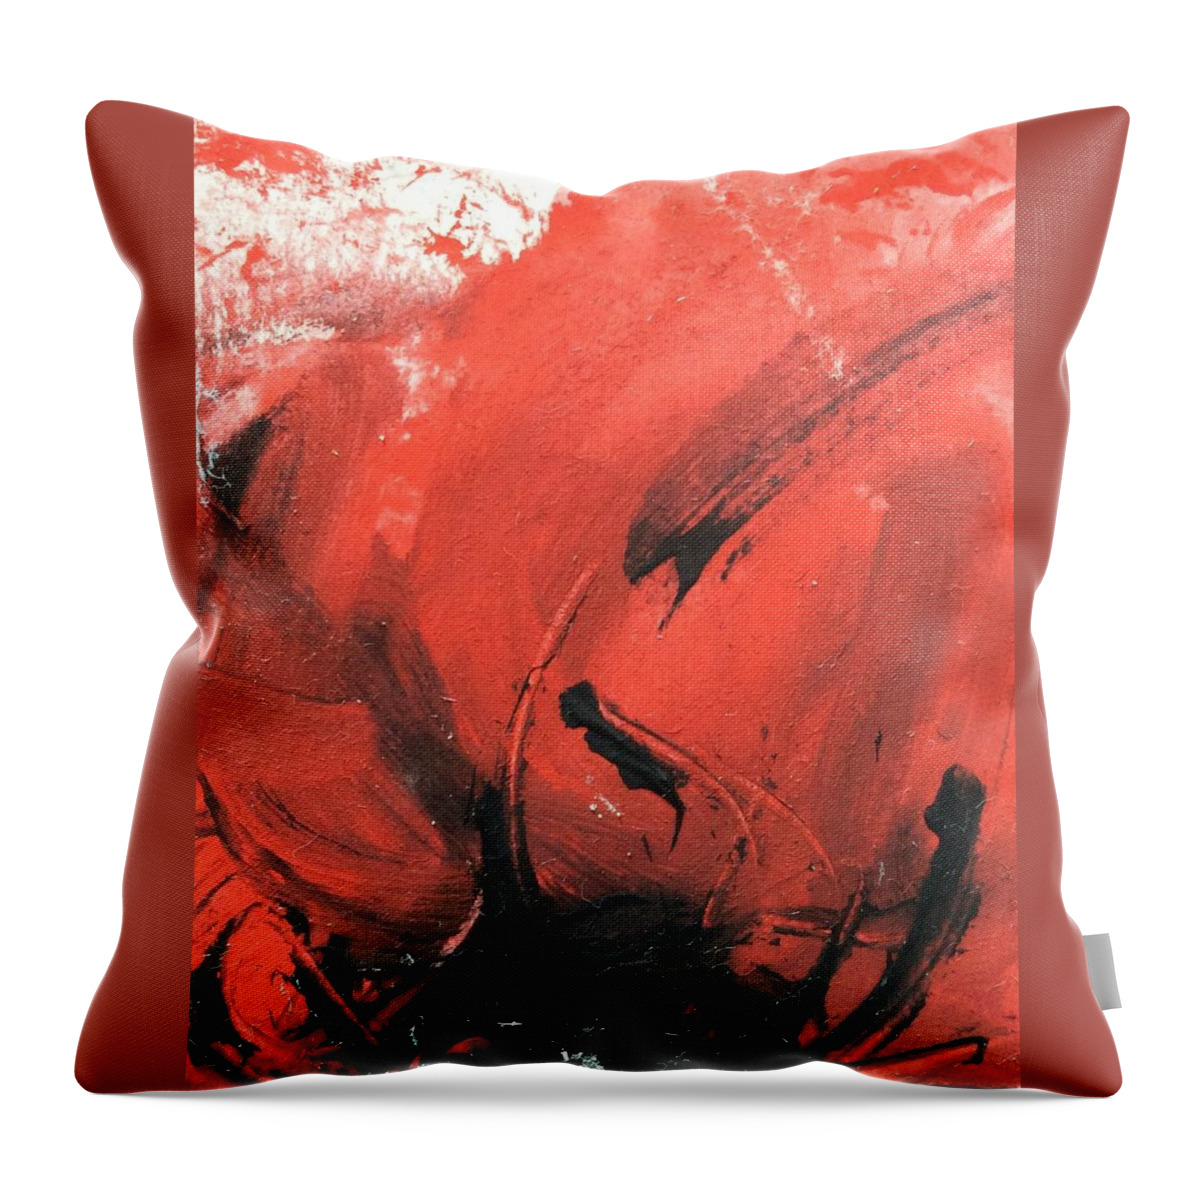 Poppy Throw Pillow featuring the painting Remembrance 1 by Maxie Absell